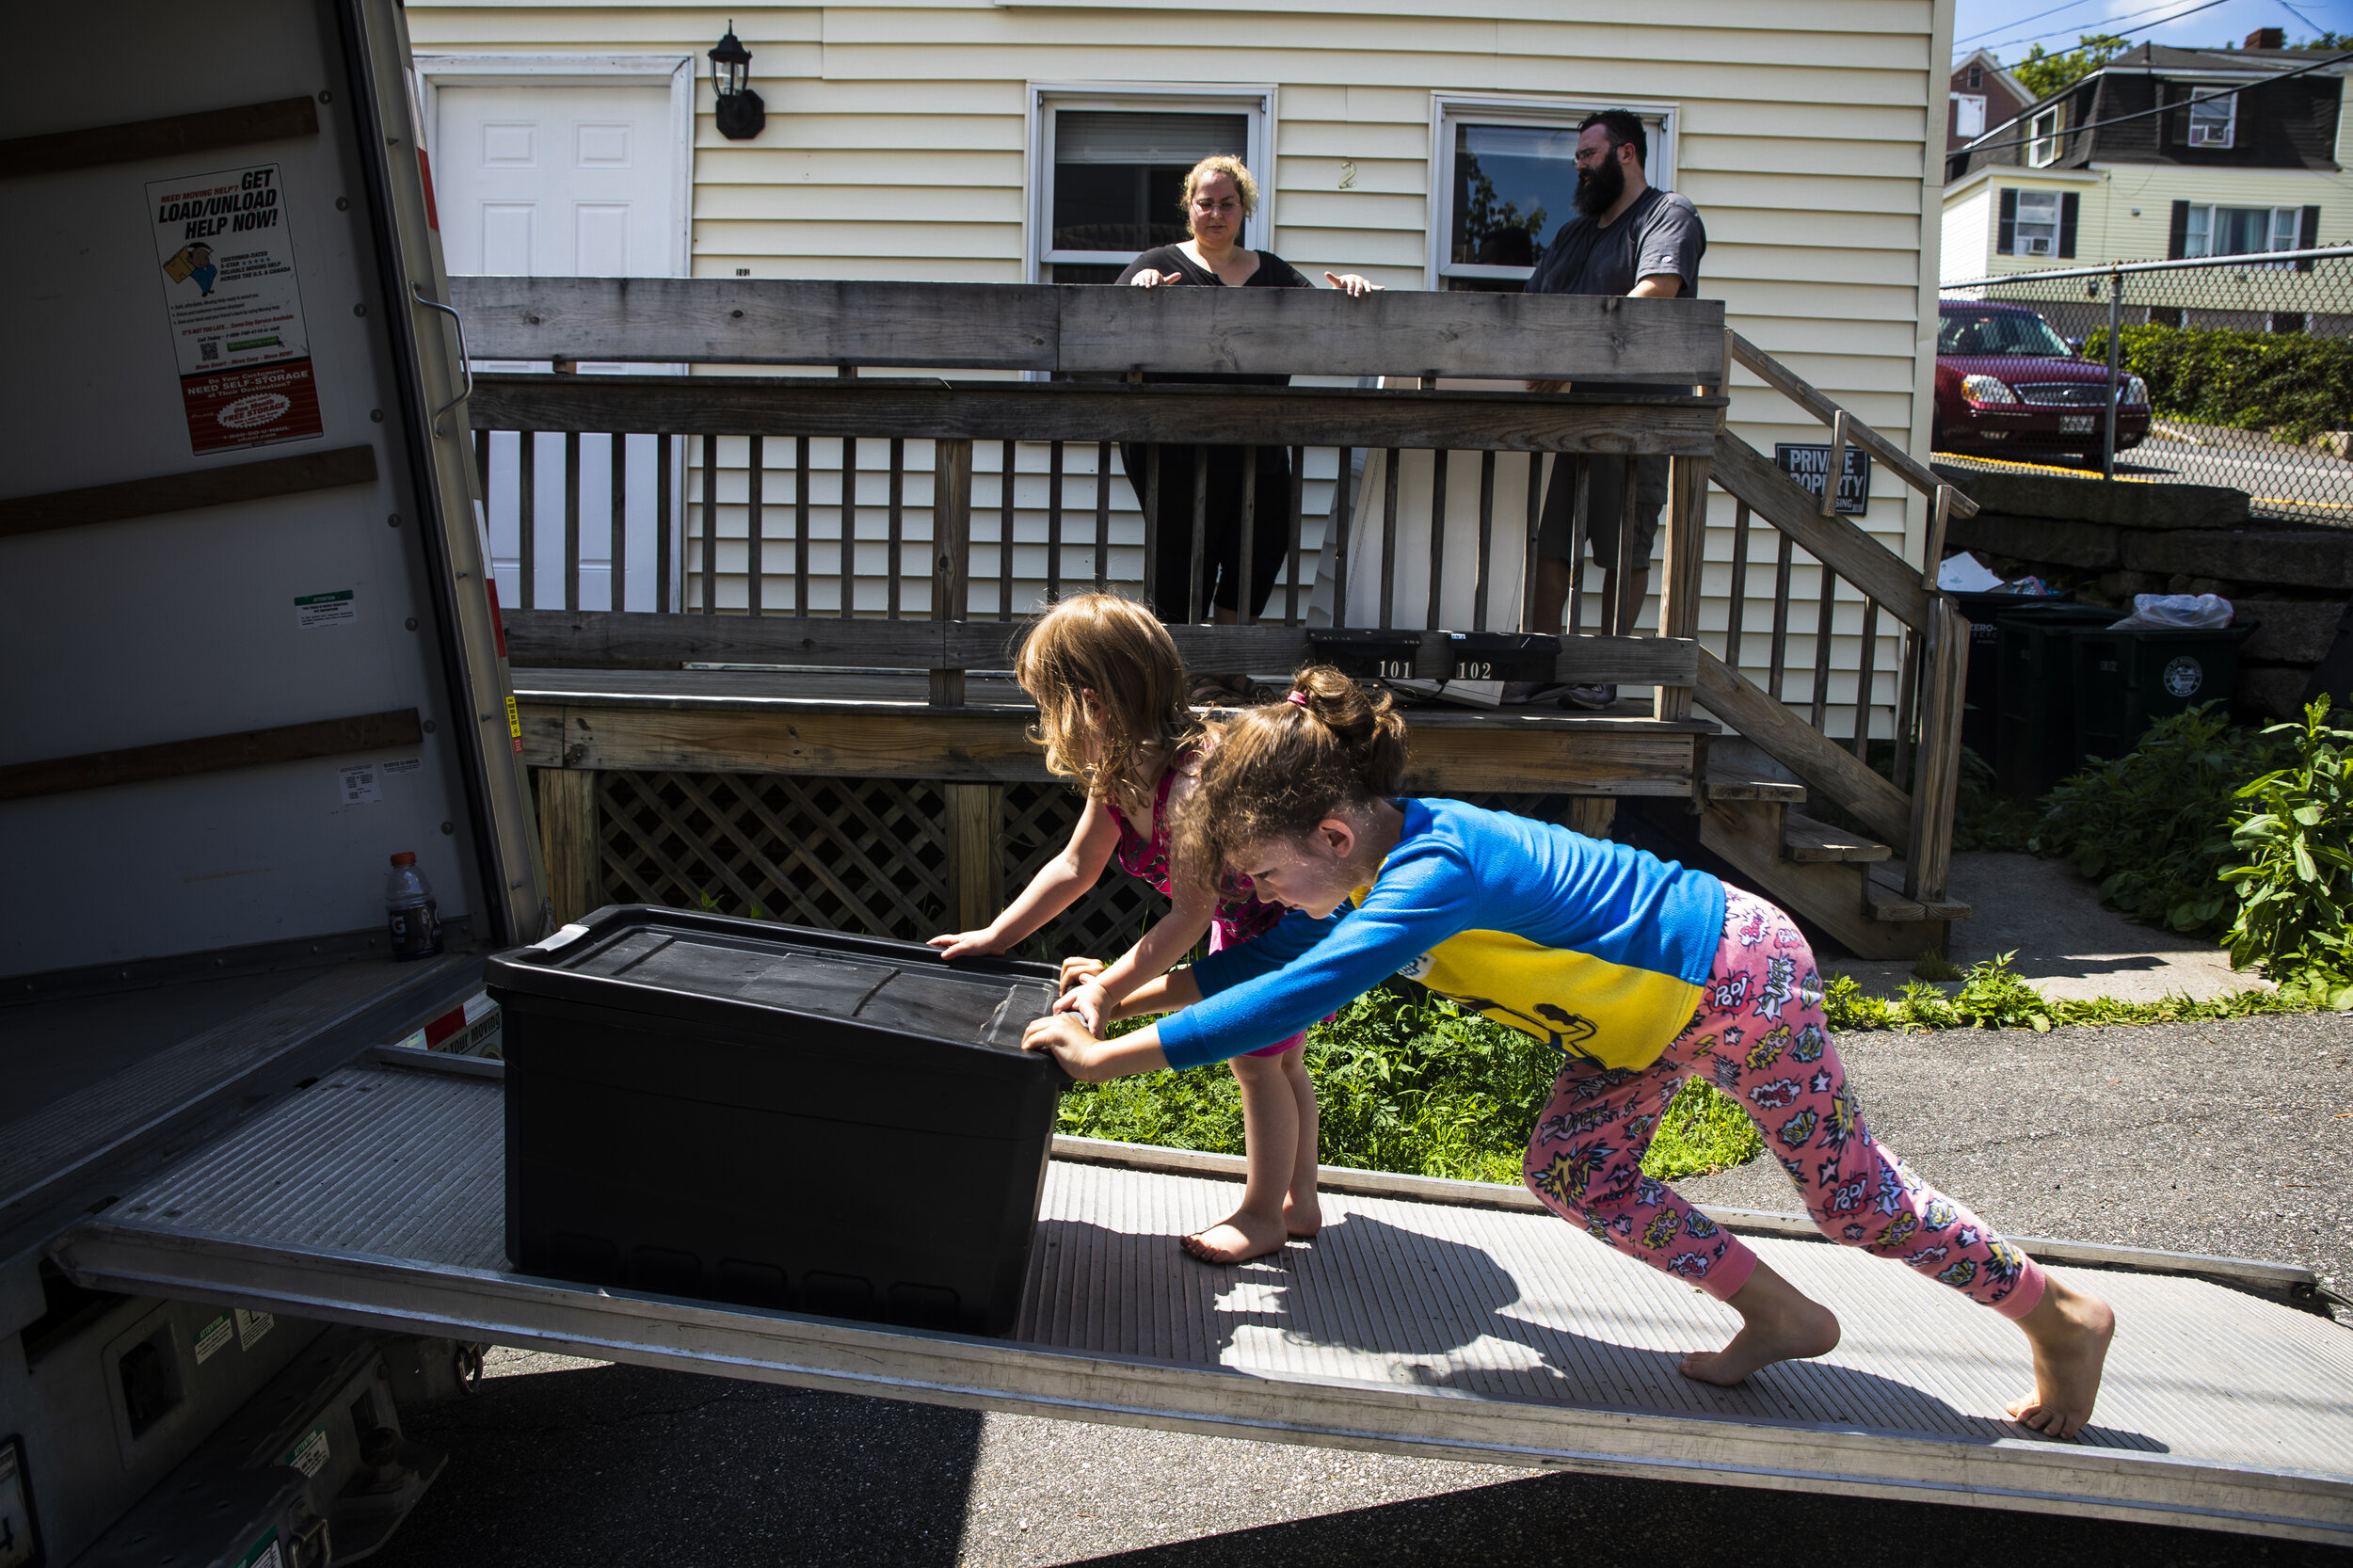 Siblings Laya, left and Evan Lupien push a tote up the ramp of the U-Haul while their parents, Mariah LeMieux-Lupien and Patrick Lupien, watch from the porch of their apartment. "More, more, more!" ye